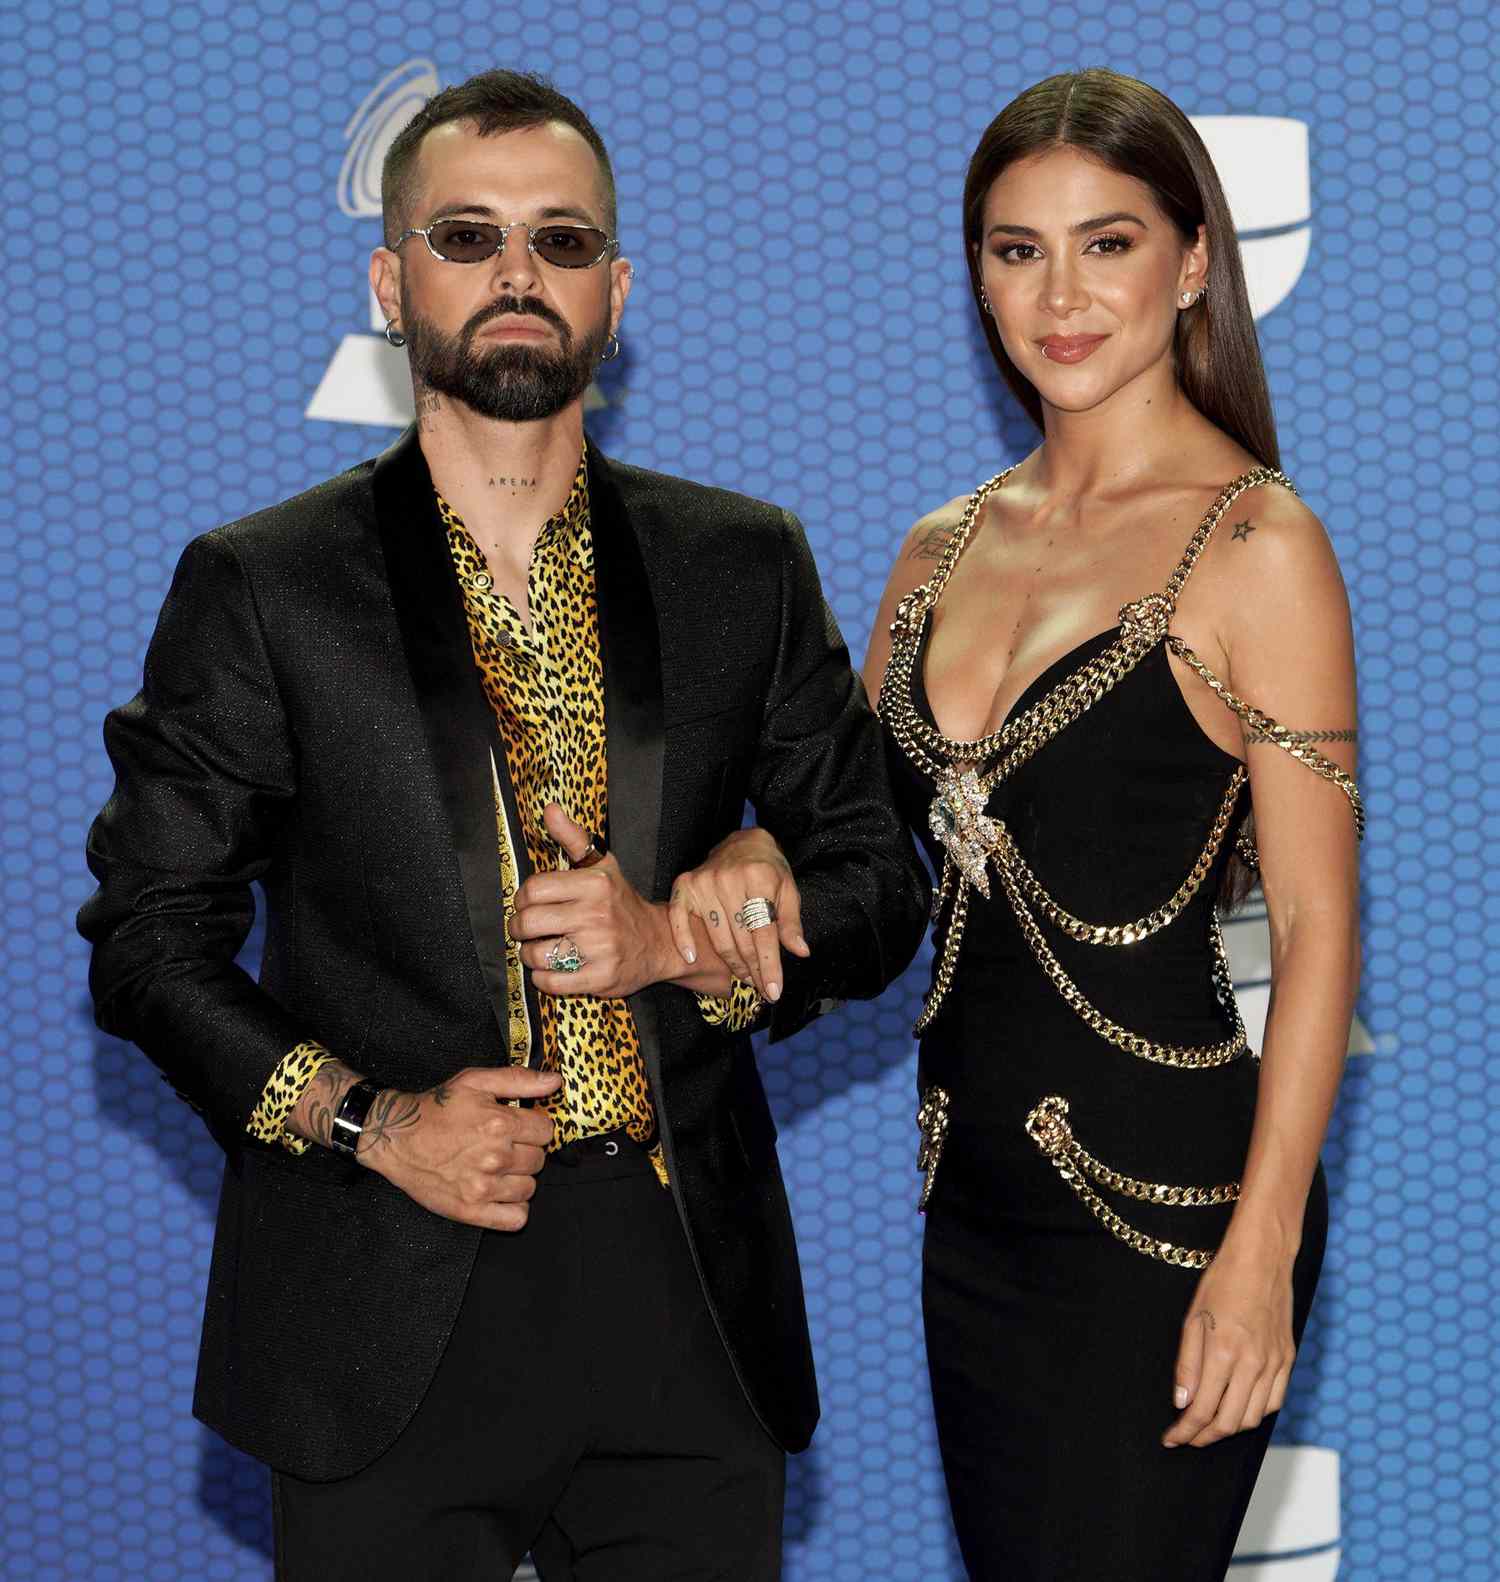 Mike Bahía and Greeicy The 21st Annual Latin GRAMMY Awards - Arrivals